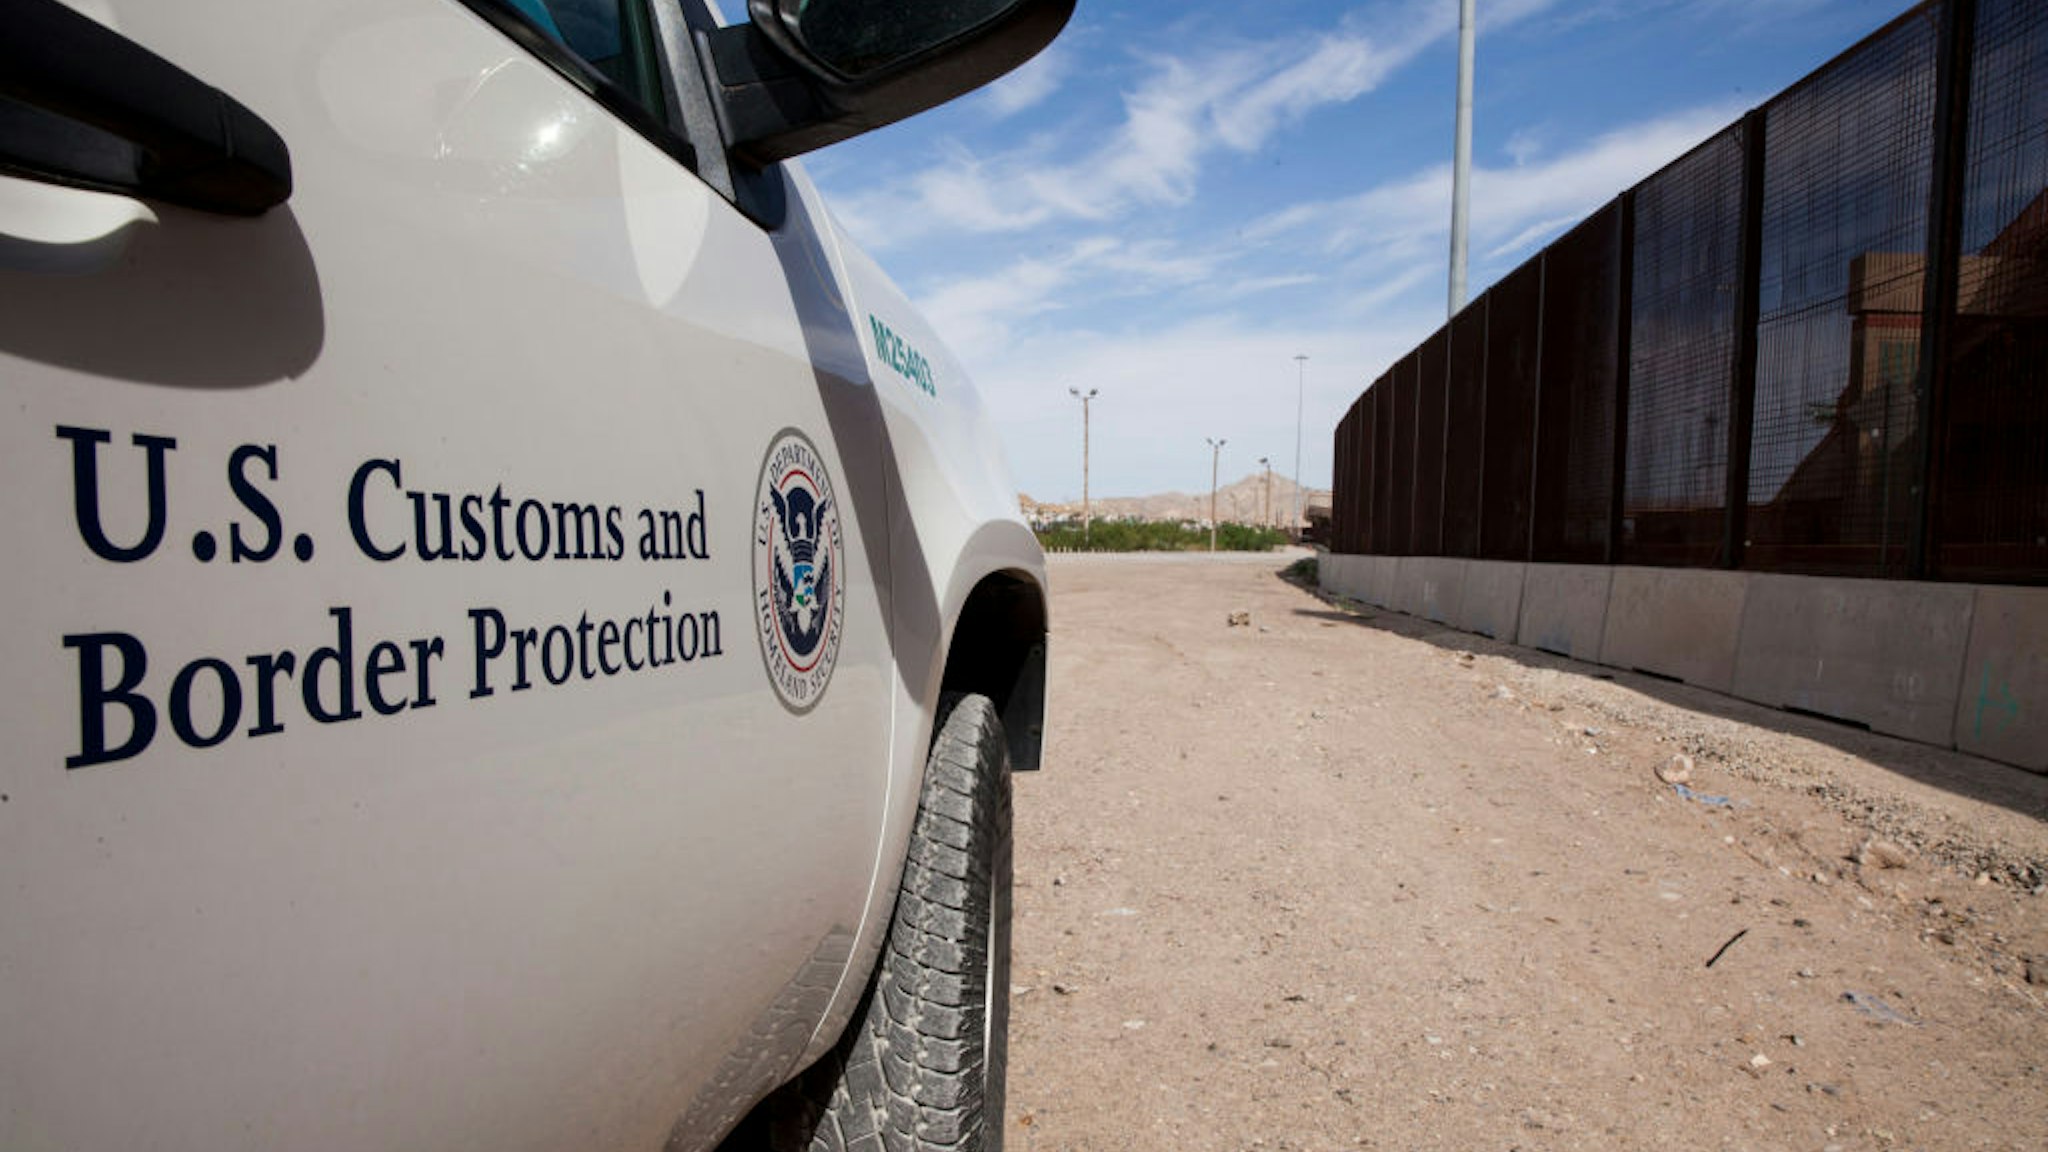 A Customs and Border Protection vehicle patrols the border fence in El Paso, Texas on Aug. 23, 2019.